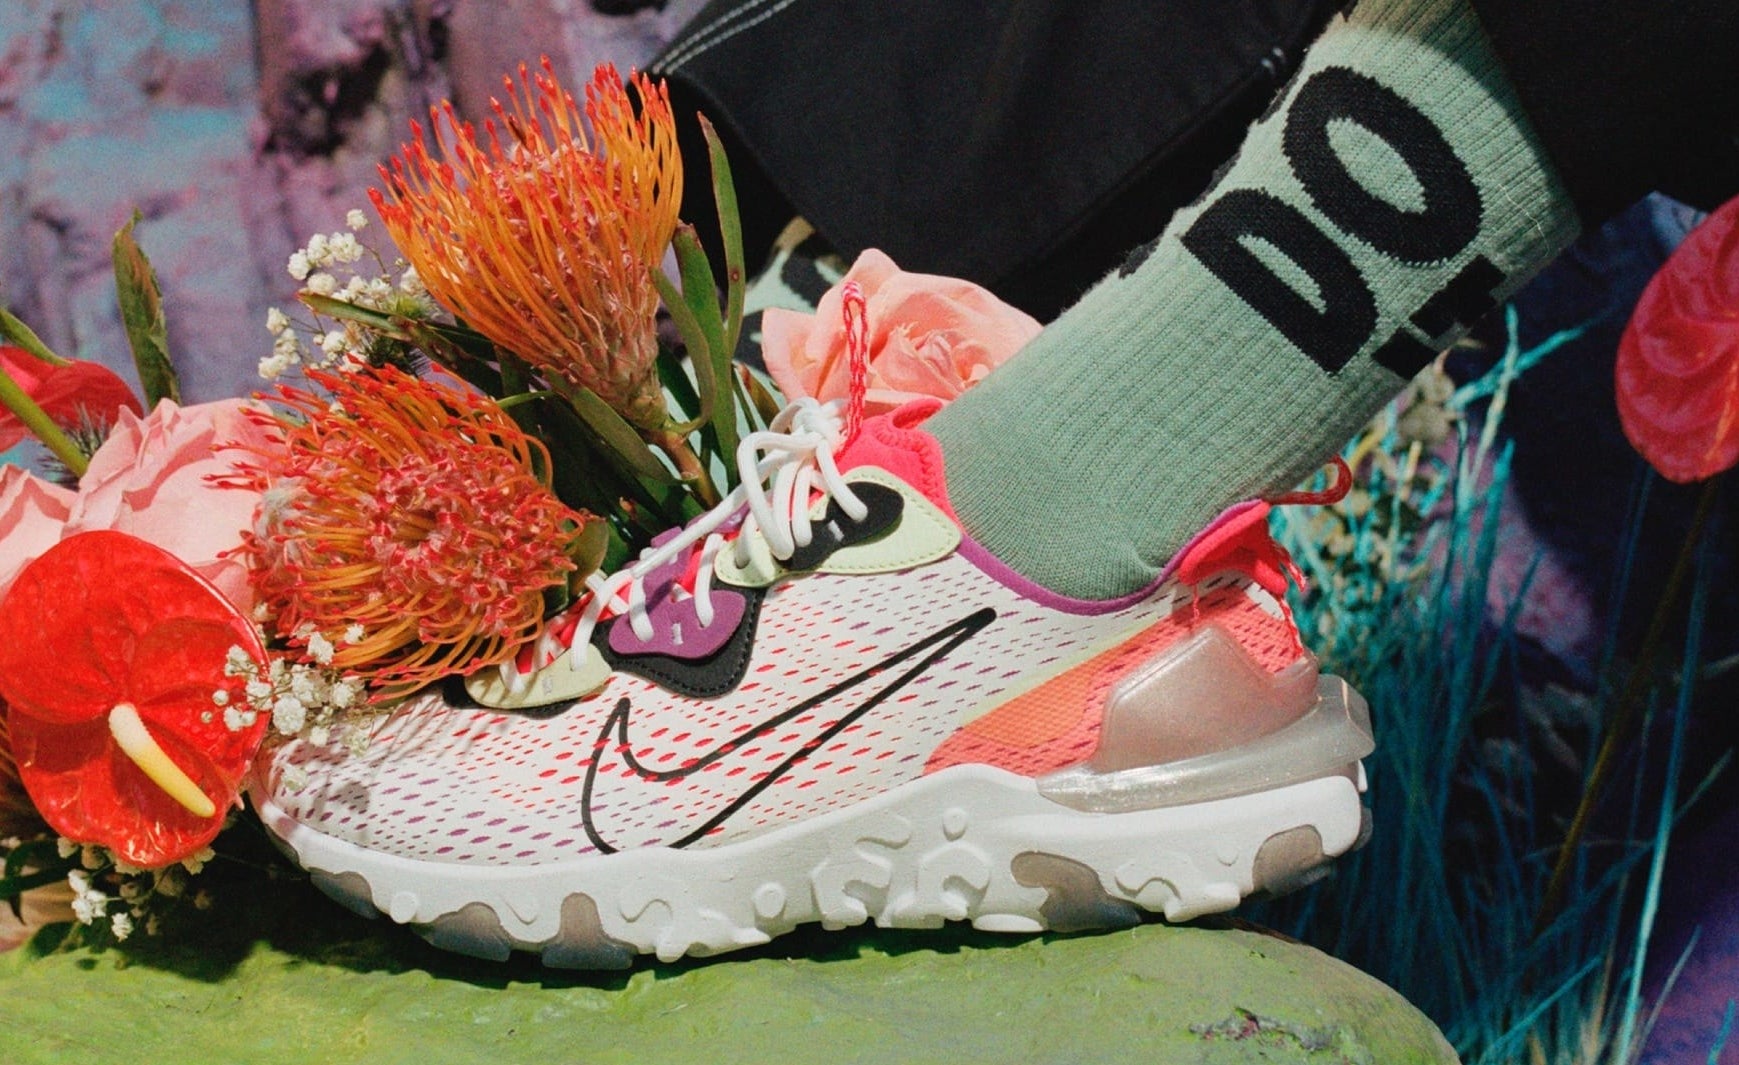 Model wears pink and white Nike React Vision shoe with &quot;Just Do It&quot; green socks